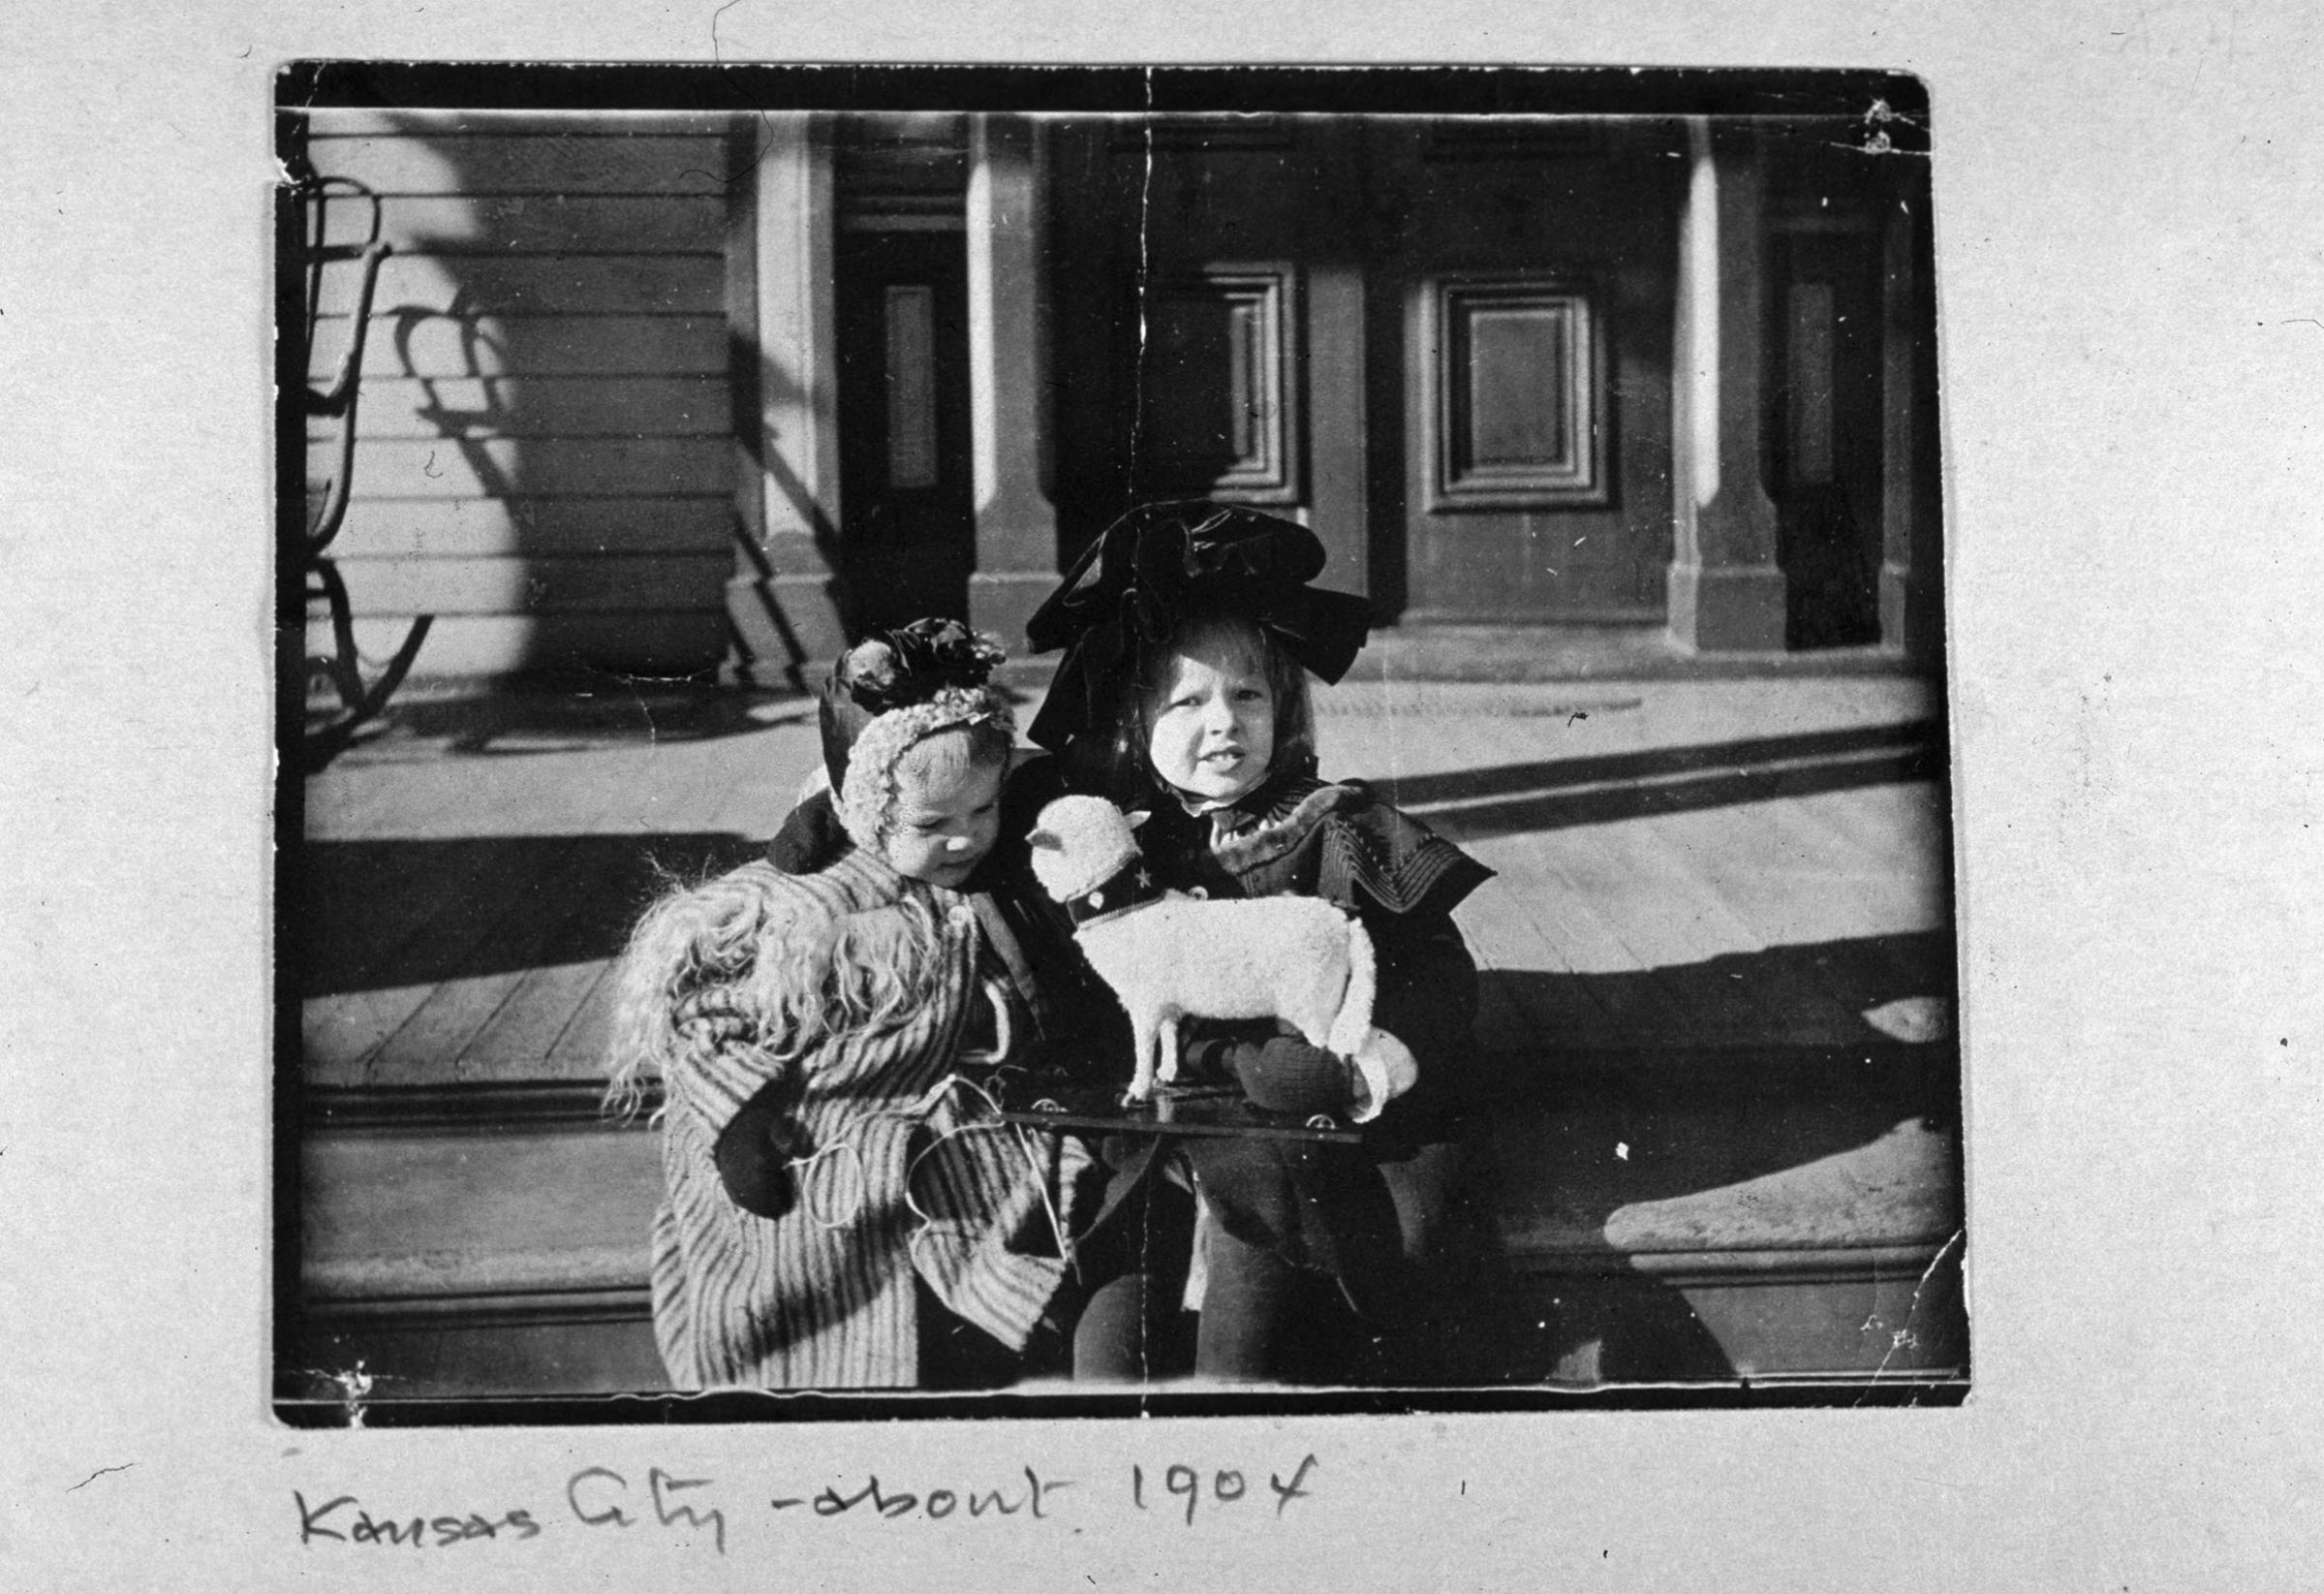 Baby picture of pilot Amelia Earhart with a dog, a toy sled, and her cousin Otis Balis, Kansas City.